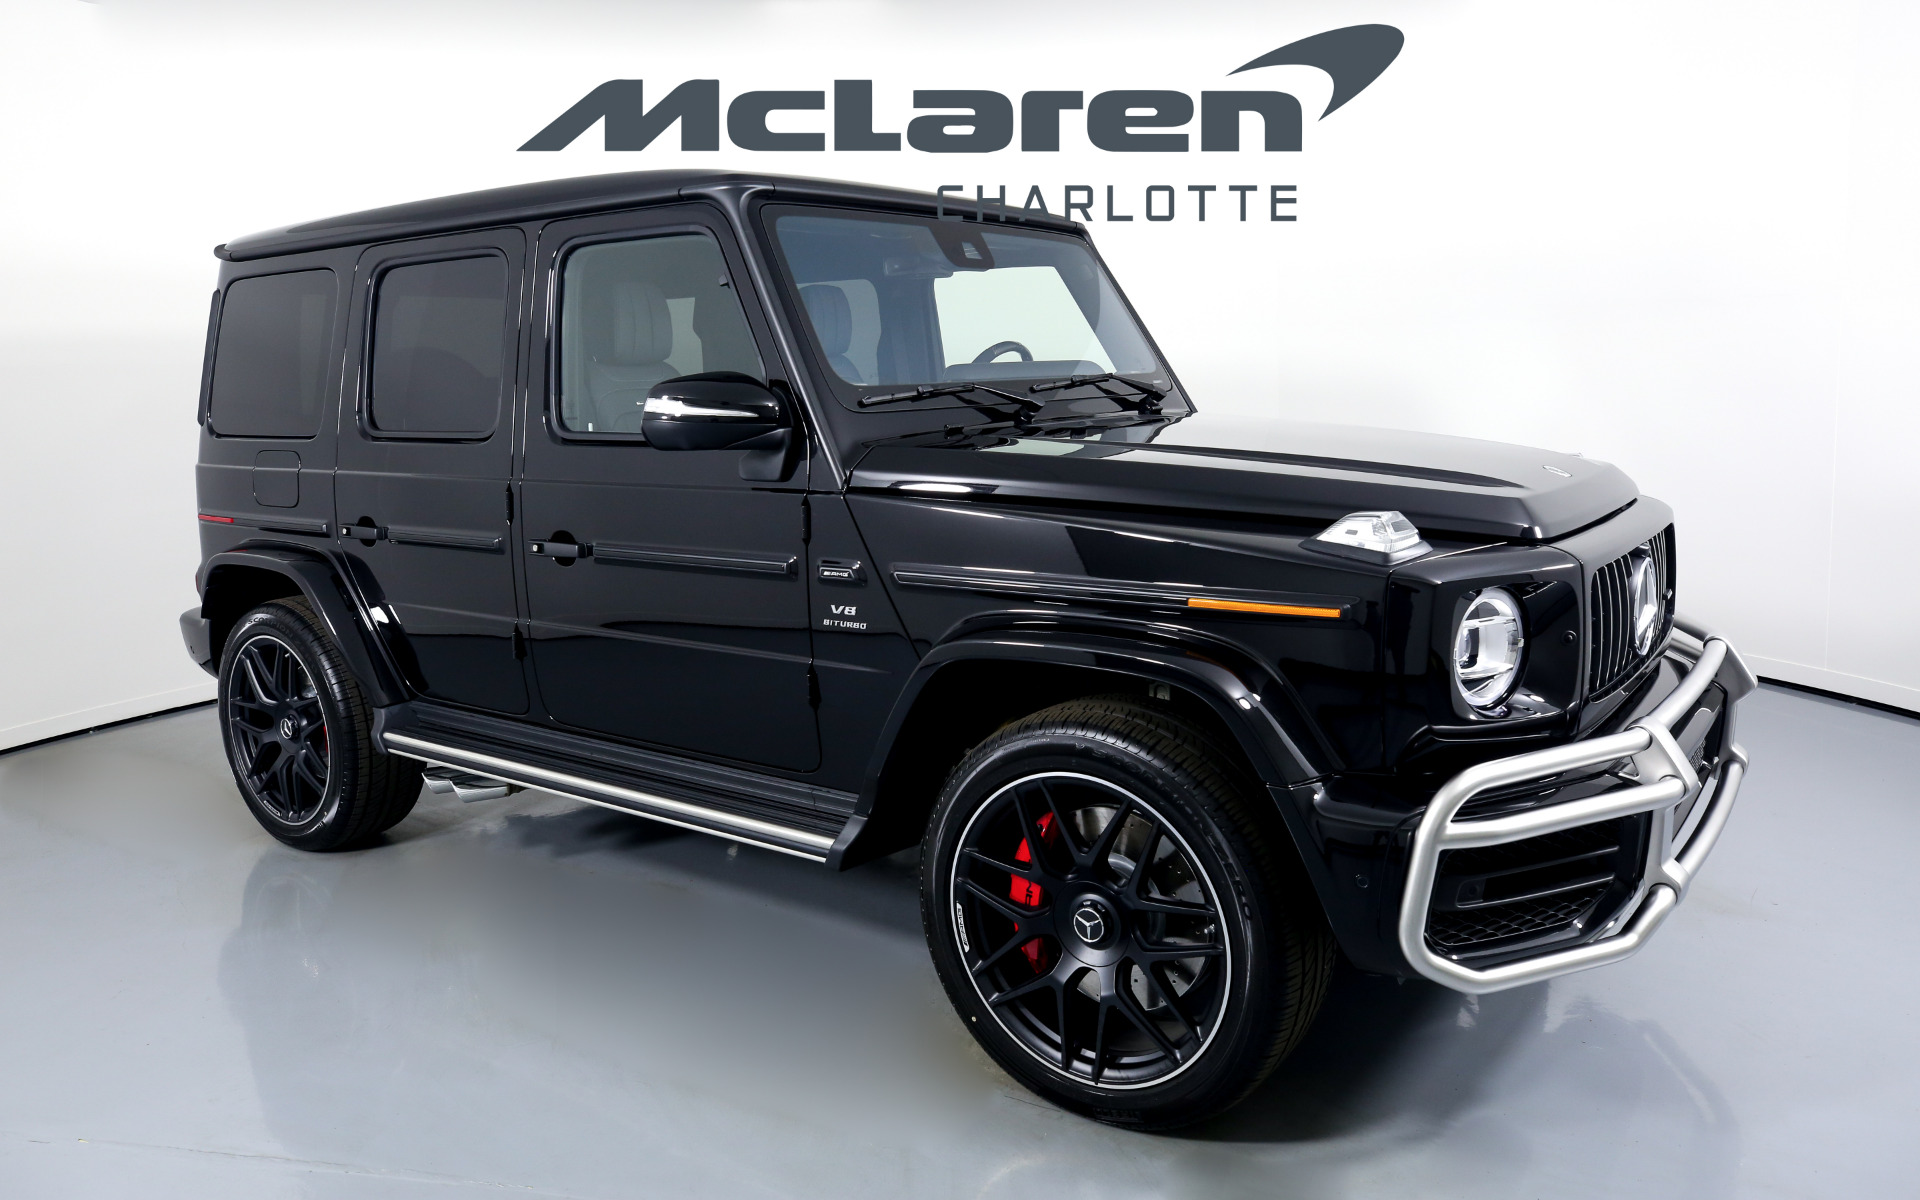 Used 21 Mercedes Benz G Class Amg G 63 For Sale 304 996 Mclaren Charlotte Stock